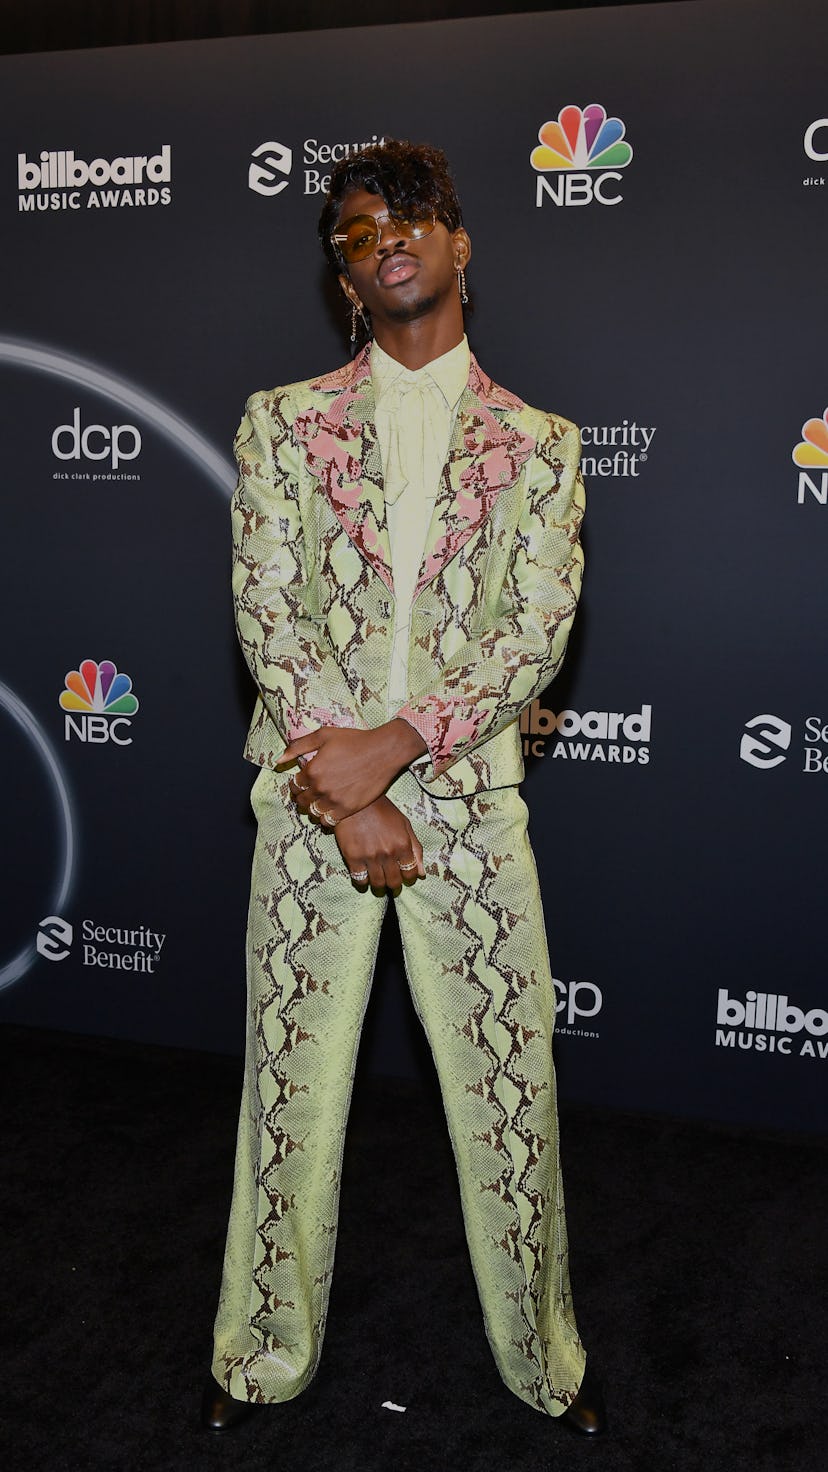 HOLLYWOOD, CALIFORNIA - OCTOBER 14: In this image released on October 14, Lil Nas X poses backstage ...